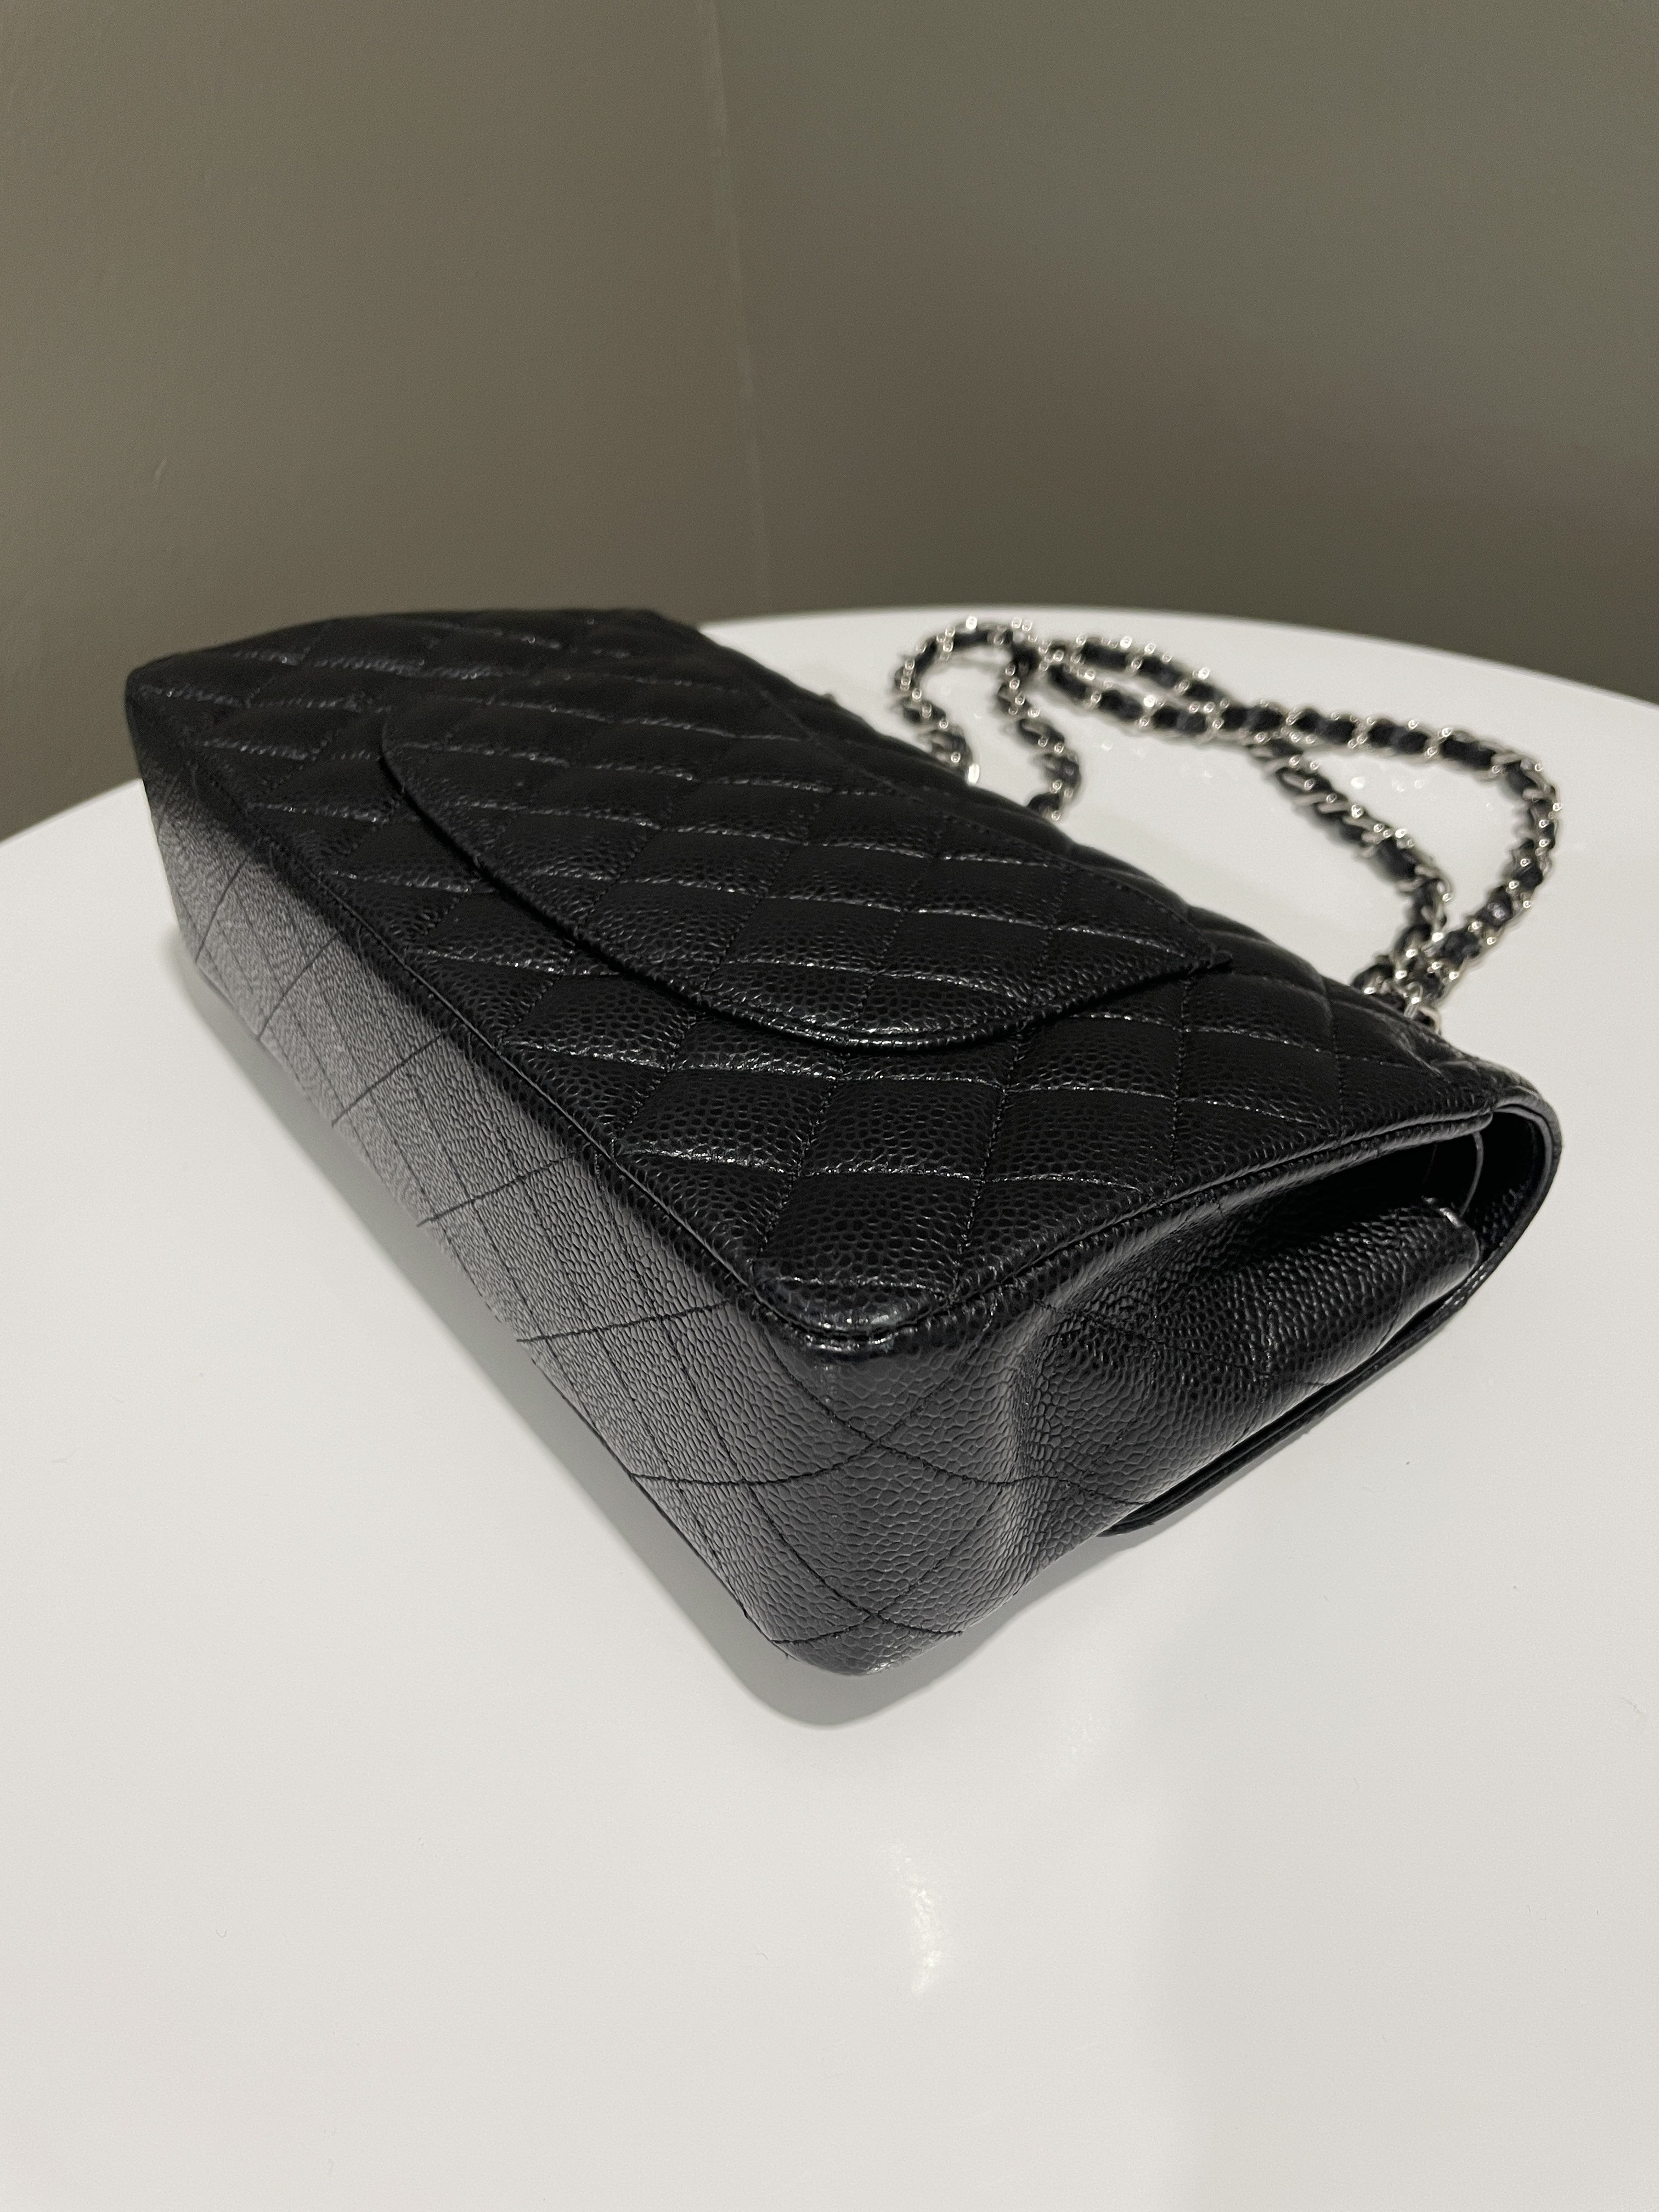 Chanel Classic Quilted Medium Double Flap
Black Caviar